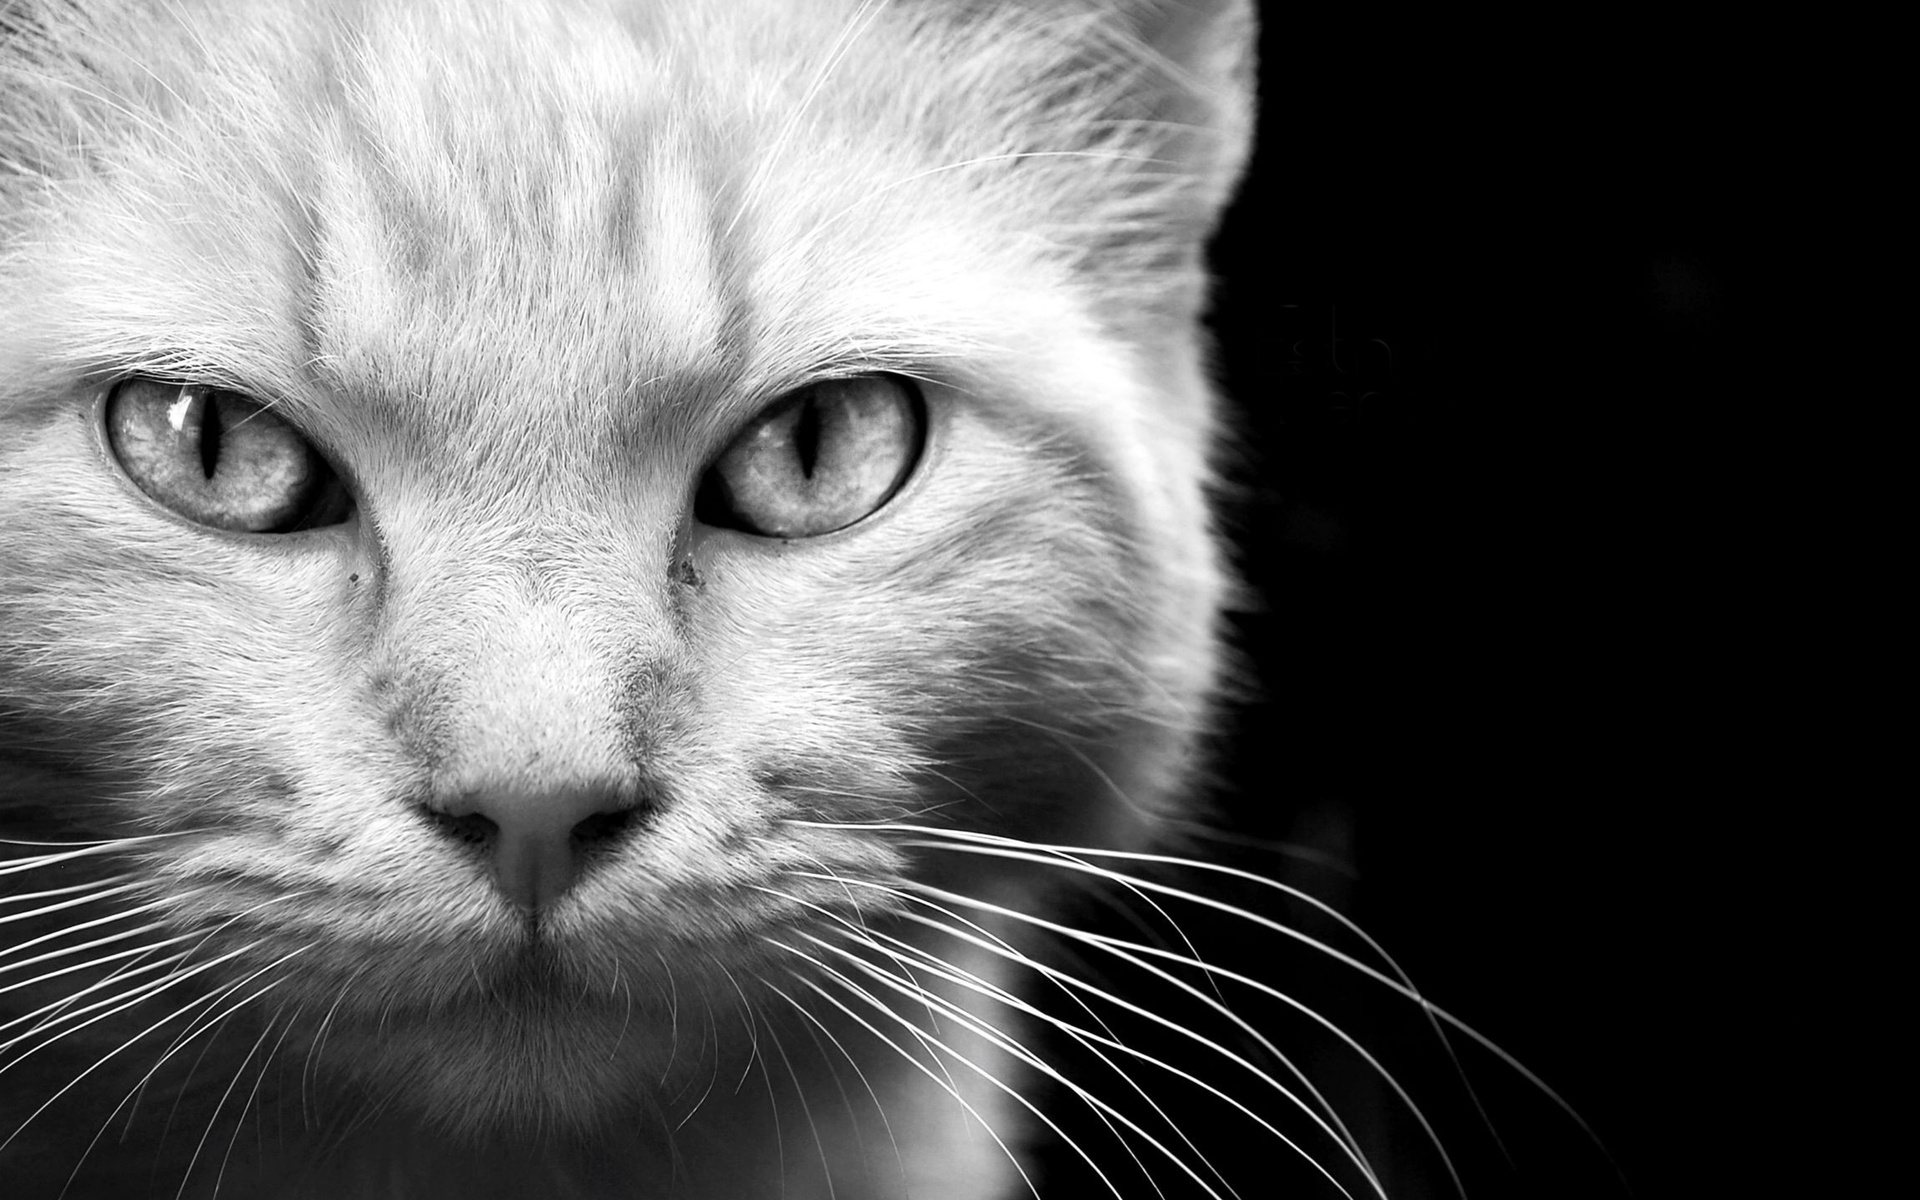 animals, Cats, Felines, Face, Eyes, Whiskers, Fur, Black, White, Monochrome  Wallpapers HD / Desktop and Mobile Backgrounds